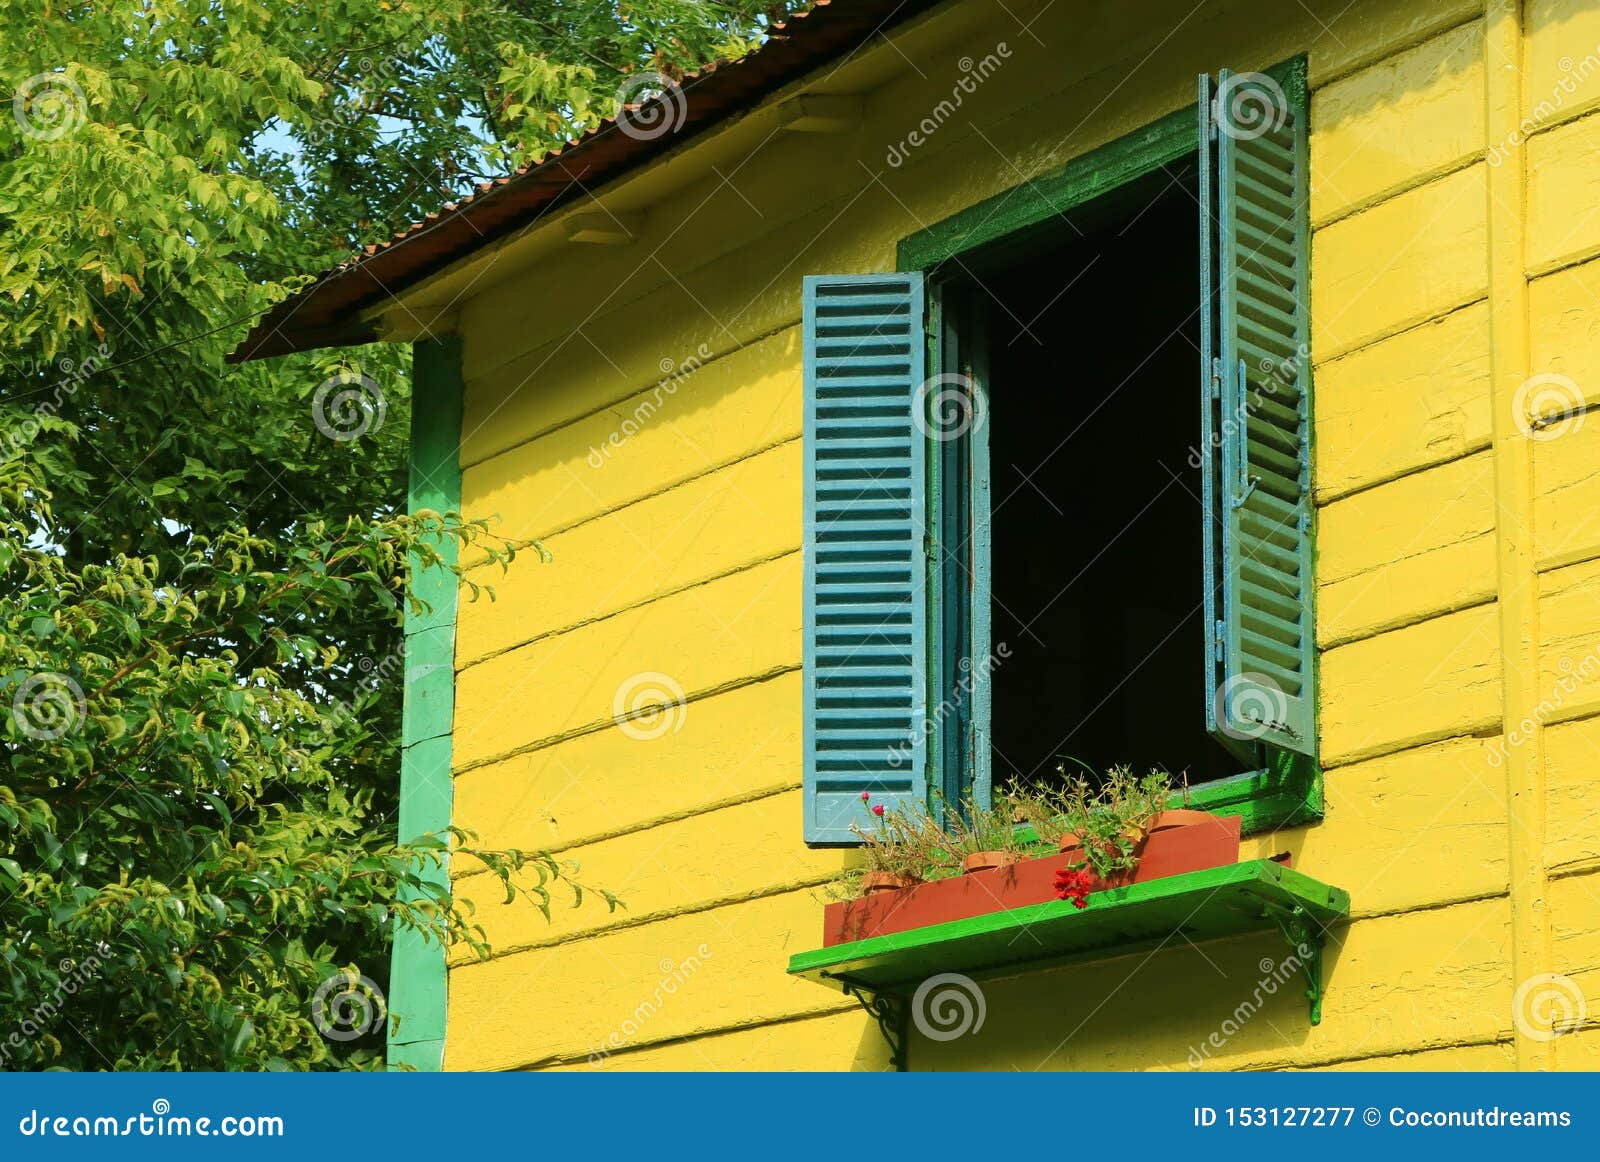 Blue Wooden Window Shutters On Vivid Yellow House Among Green Foliage In  Sunlight Stock Image - Image Of Bright, Lush: 153127277